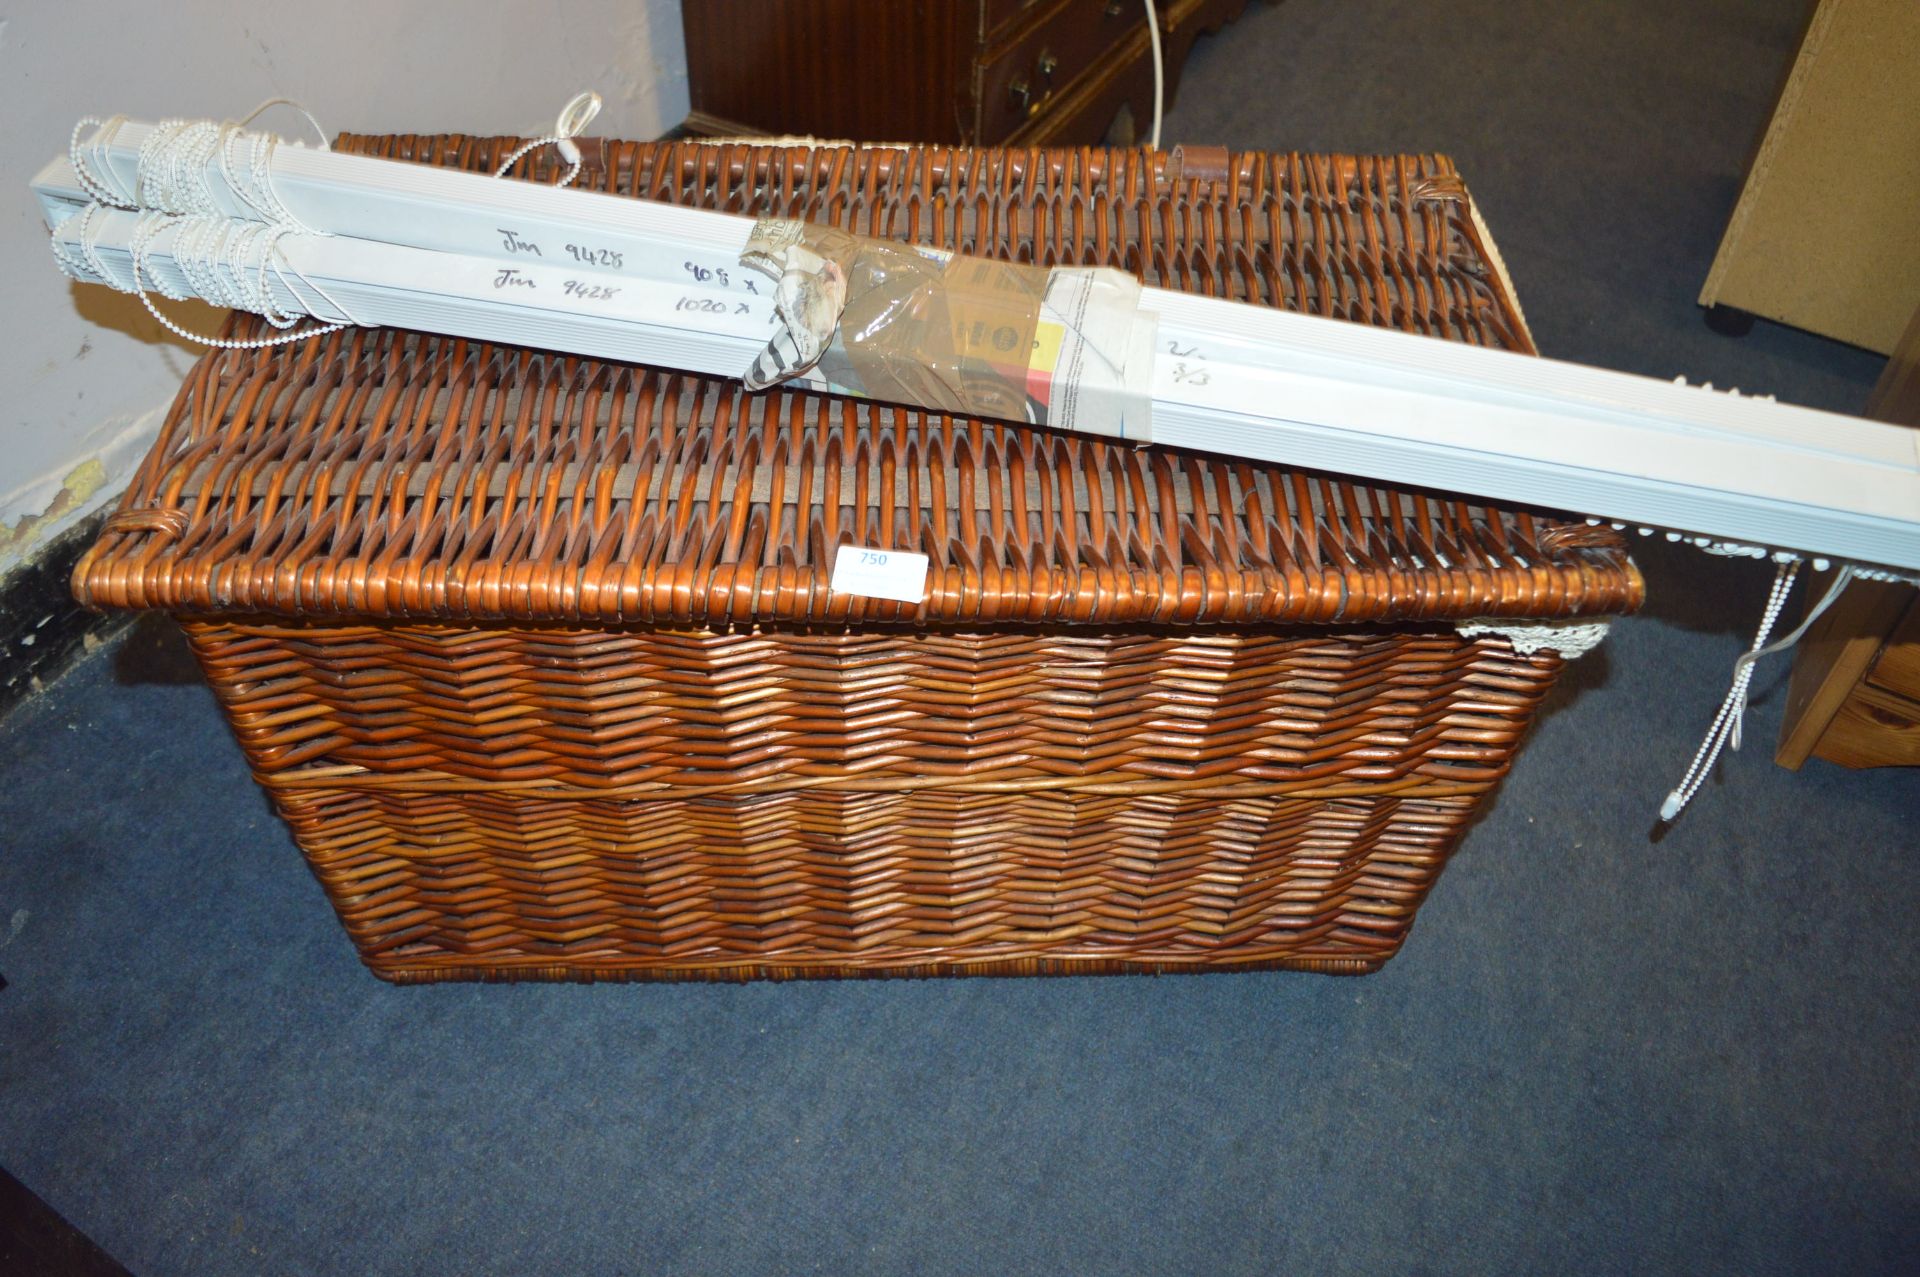 Wicker Storage Basket and Three Curtain Blinds